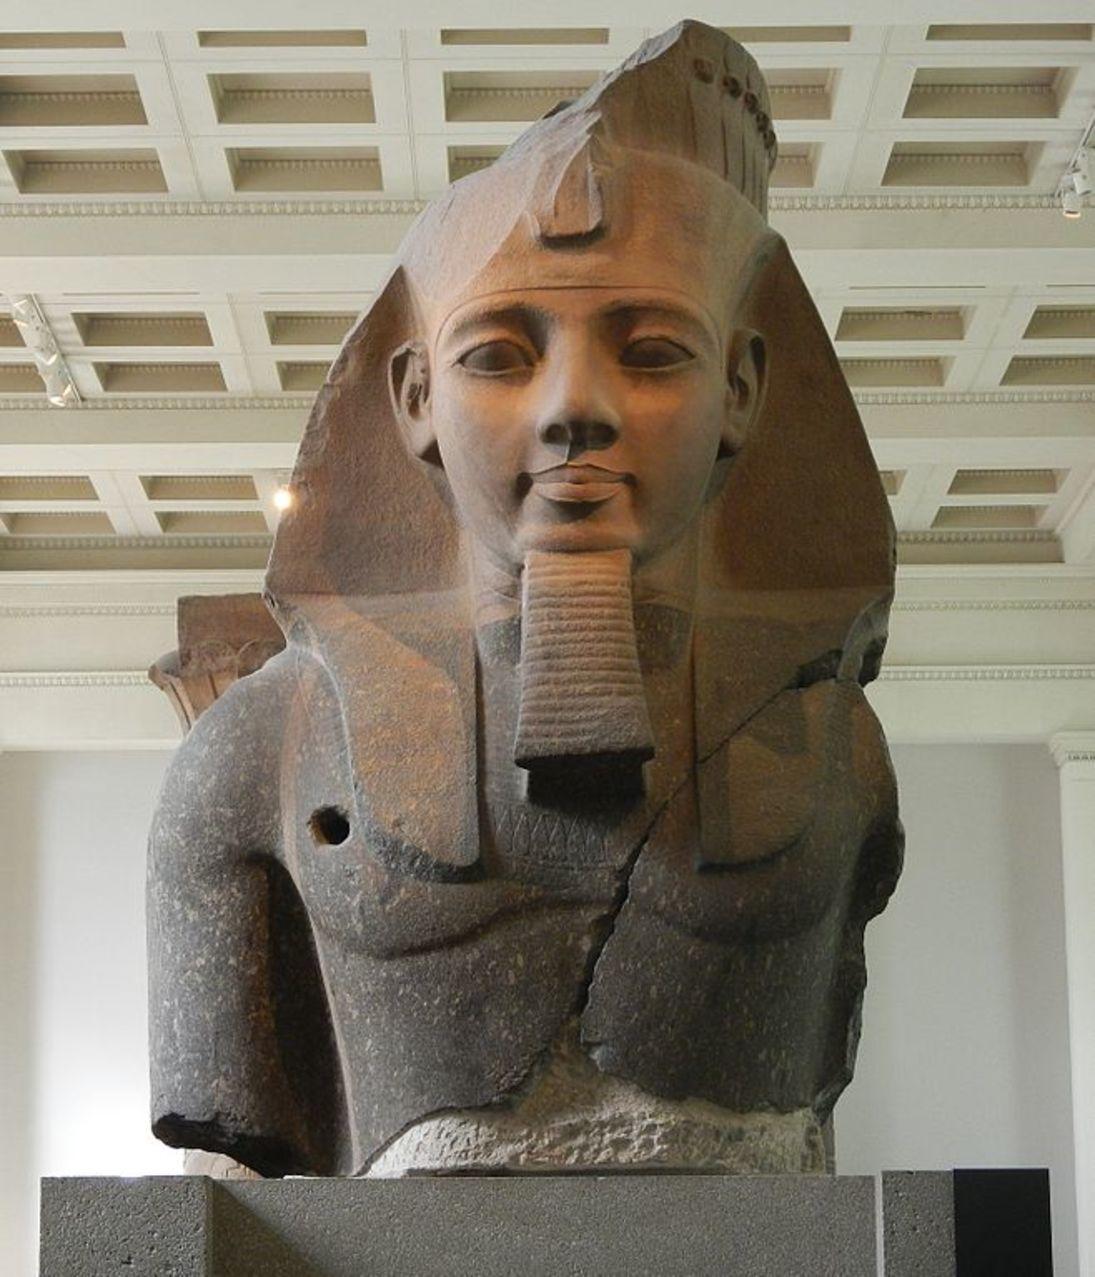 Ramessess II is often regarded as the greatest and most powerful pharaoh of Ancient Egypt (Creative Commons)